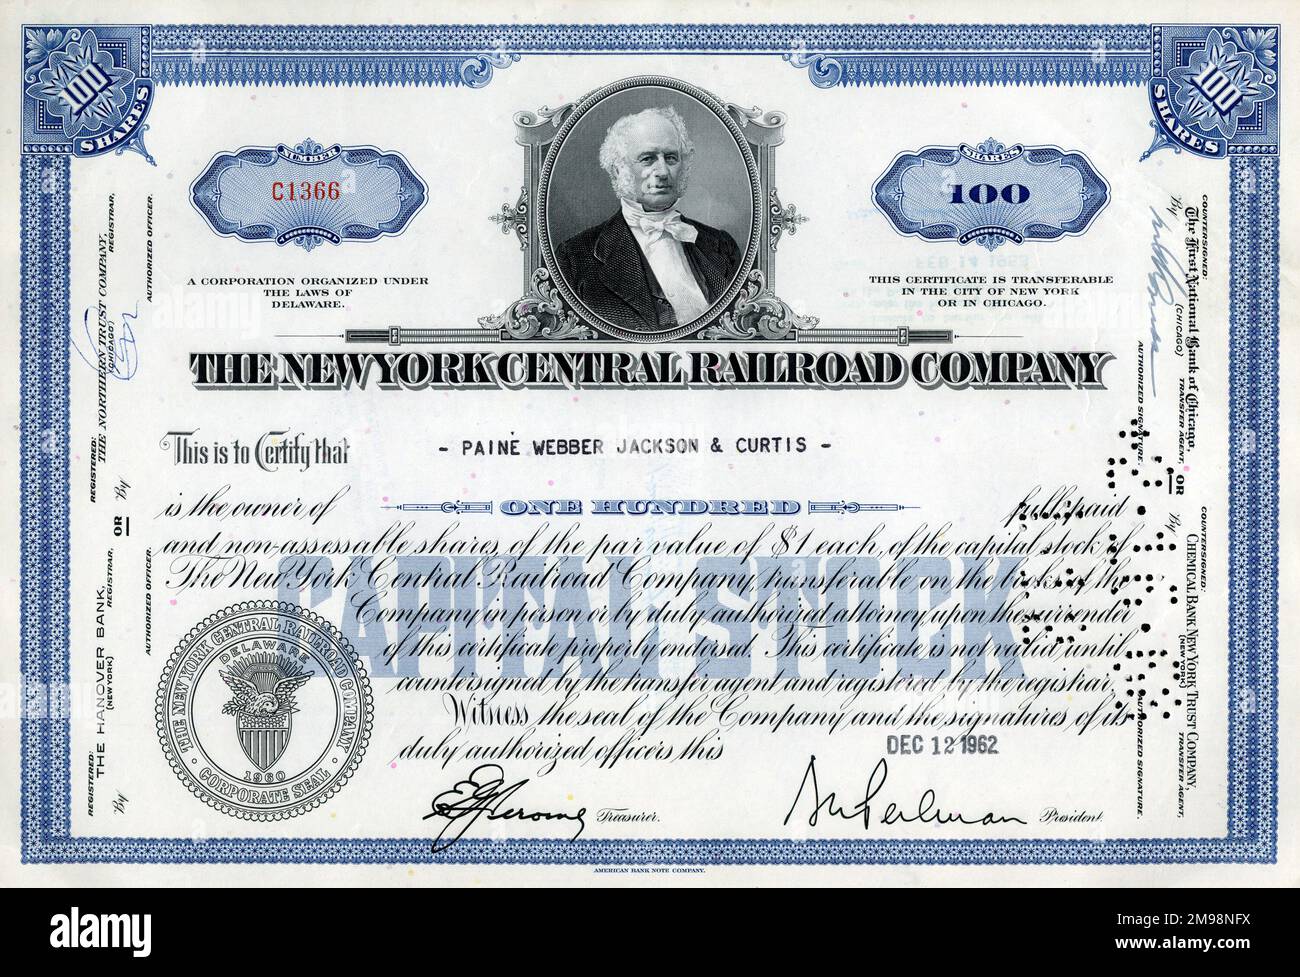 Stock Share Certificate - New York Central Railroad Company, 100 shares. Stock Photo